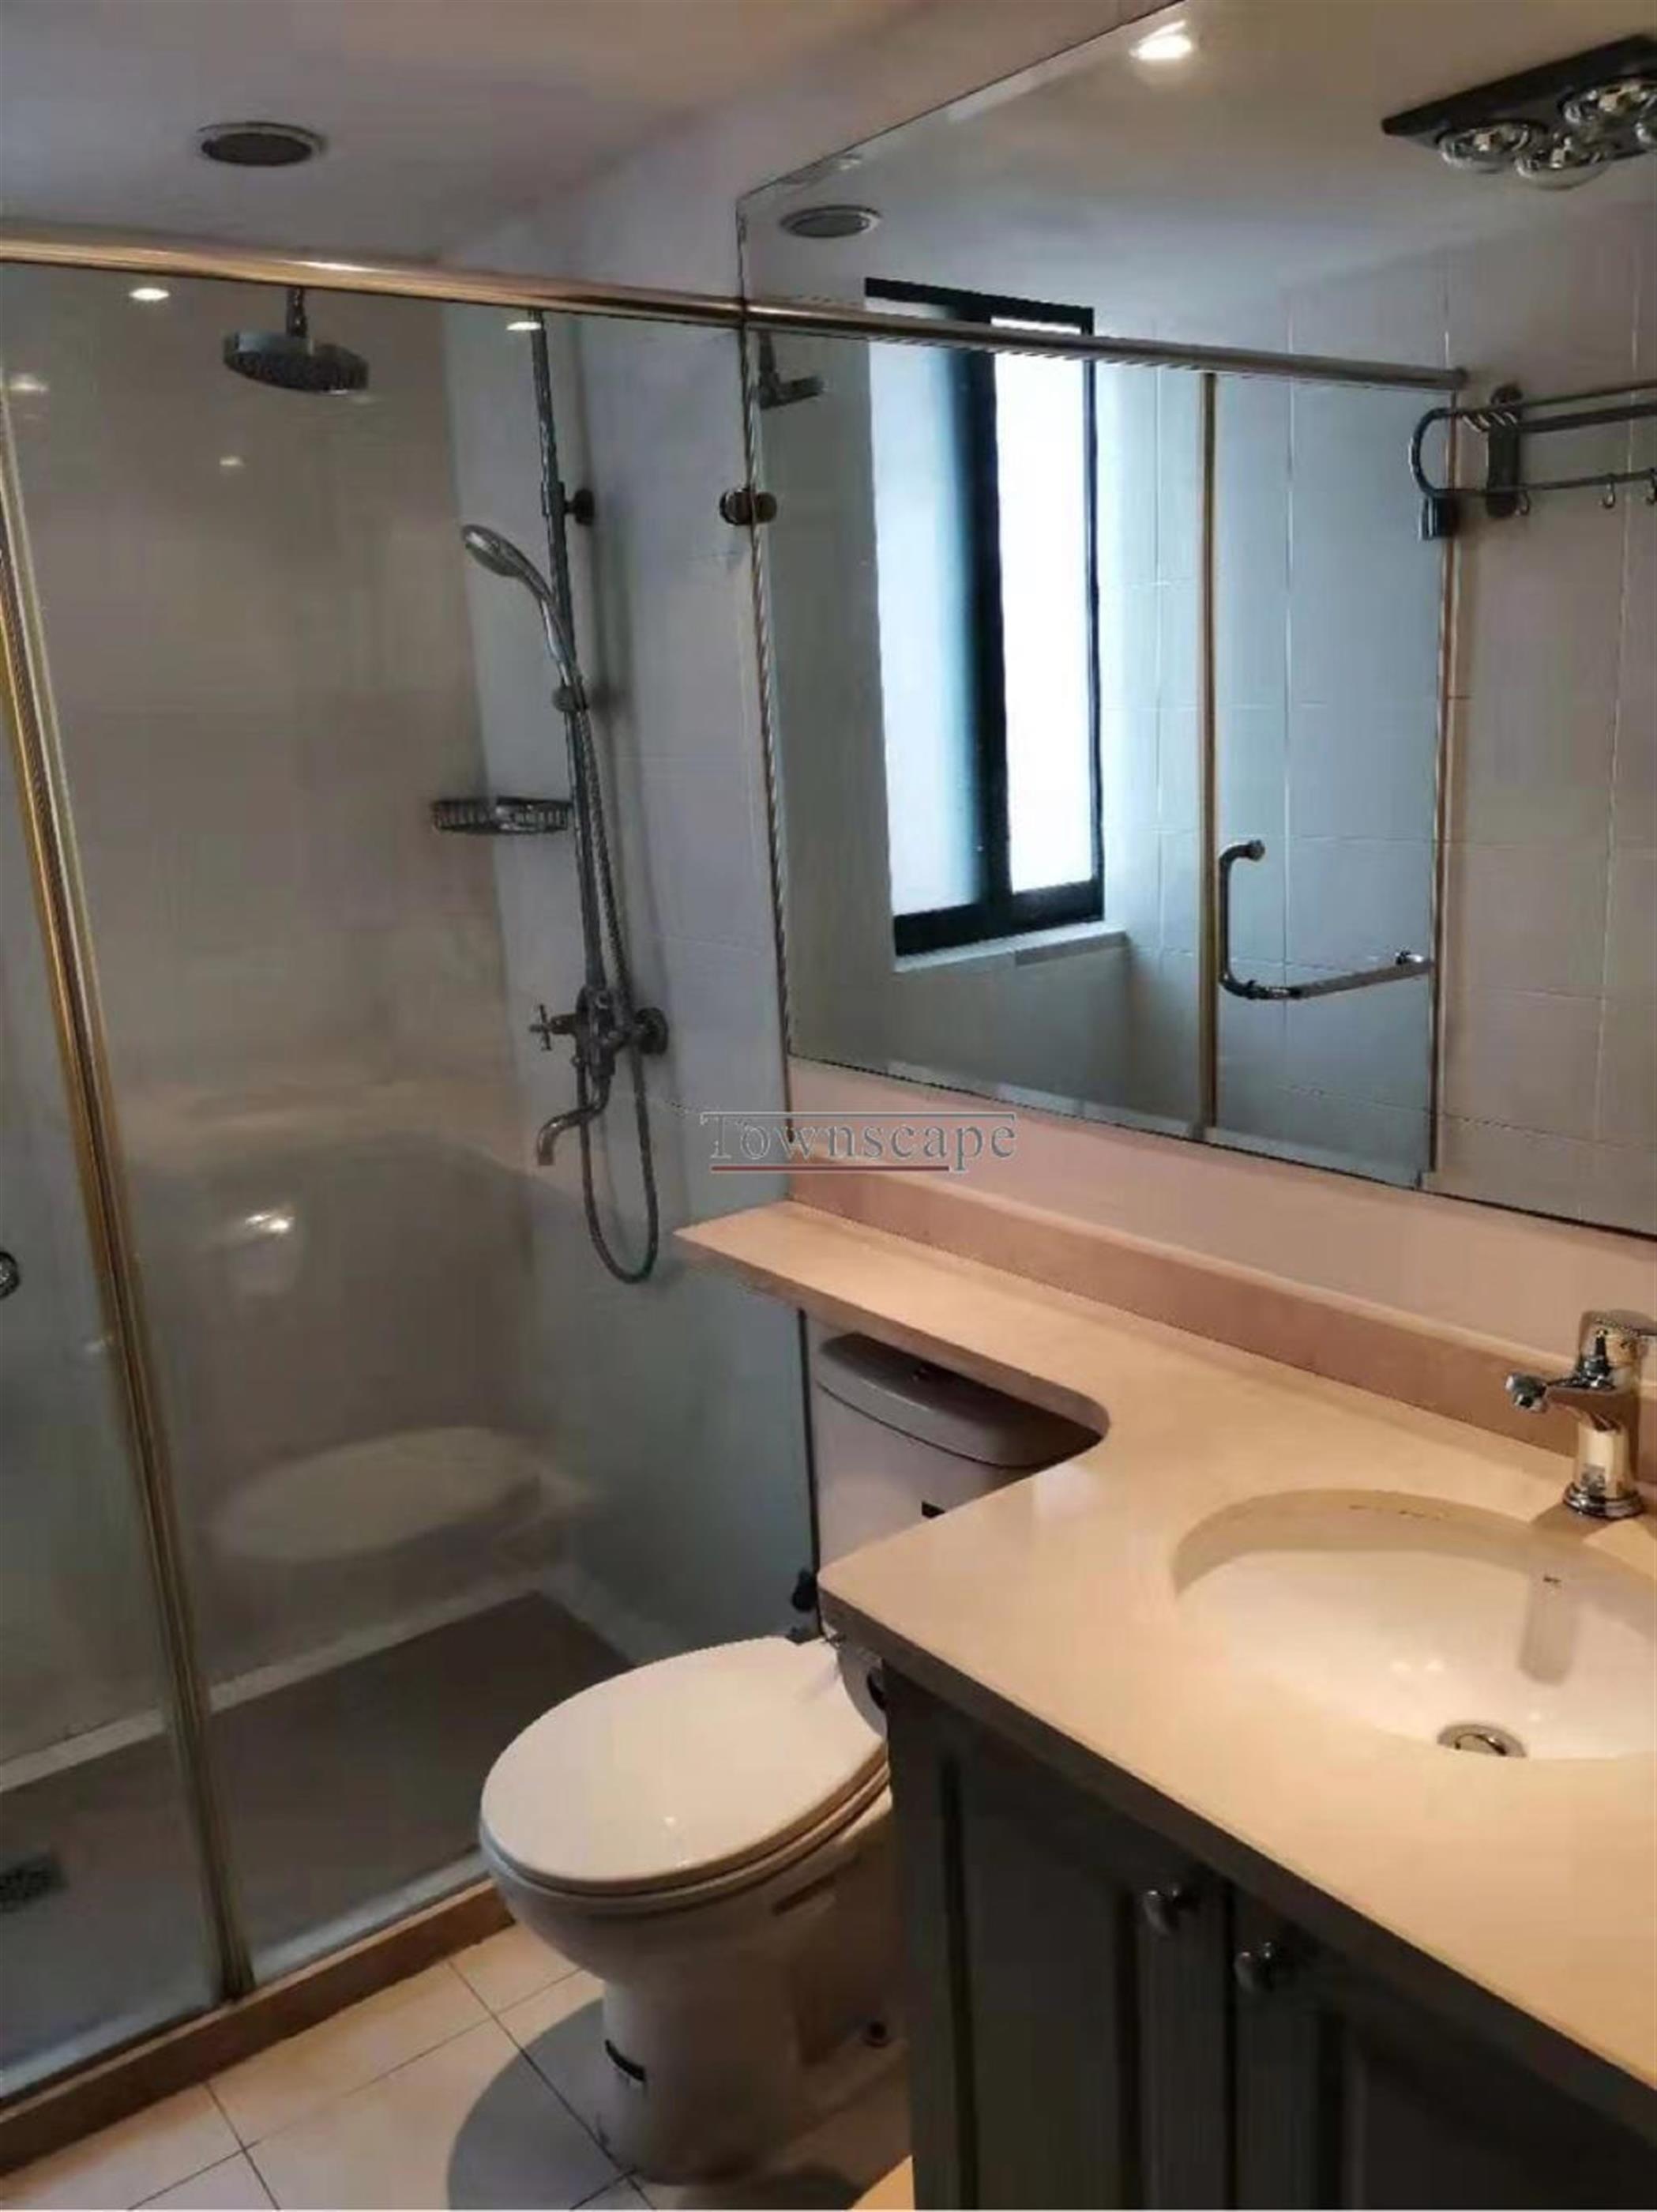 large shower Great Value Spacious Bright 3BR Apartment Near LN 10 & Zoo for Rent in Shanghai